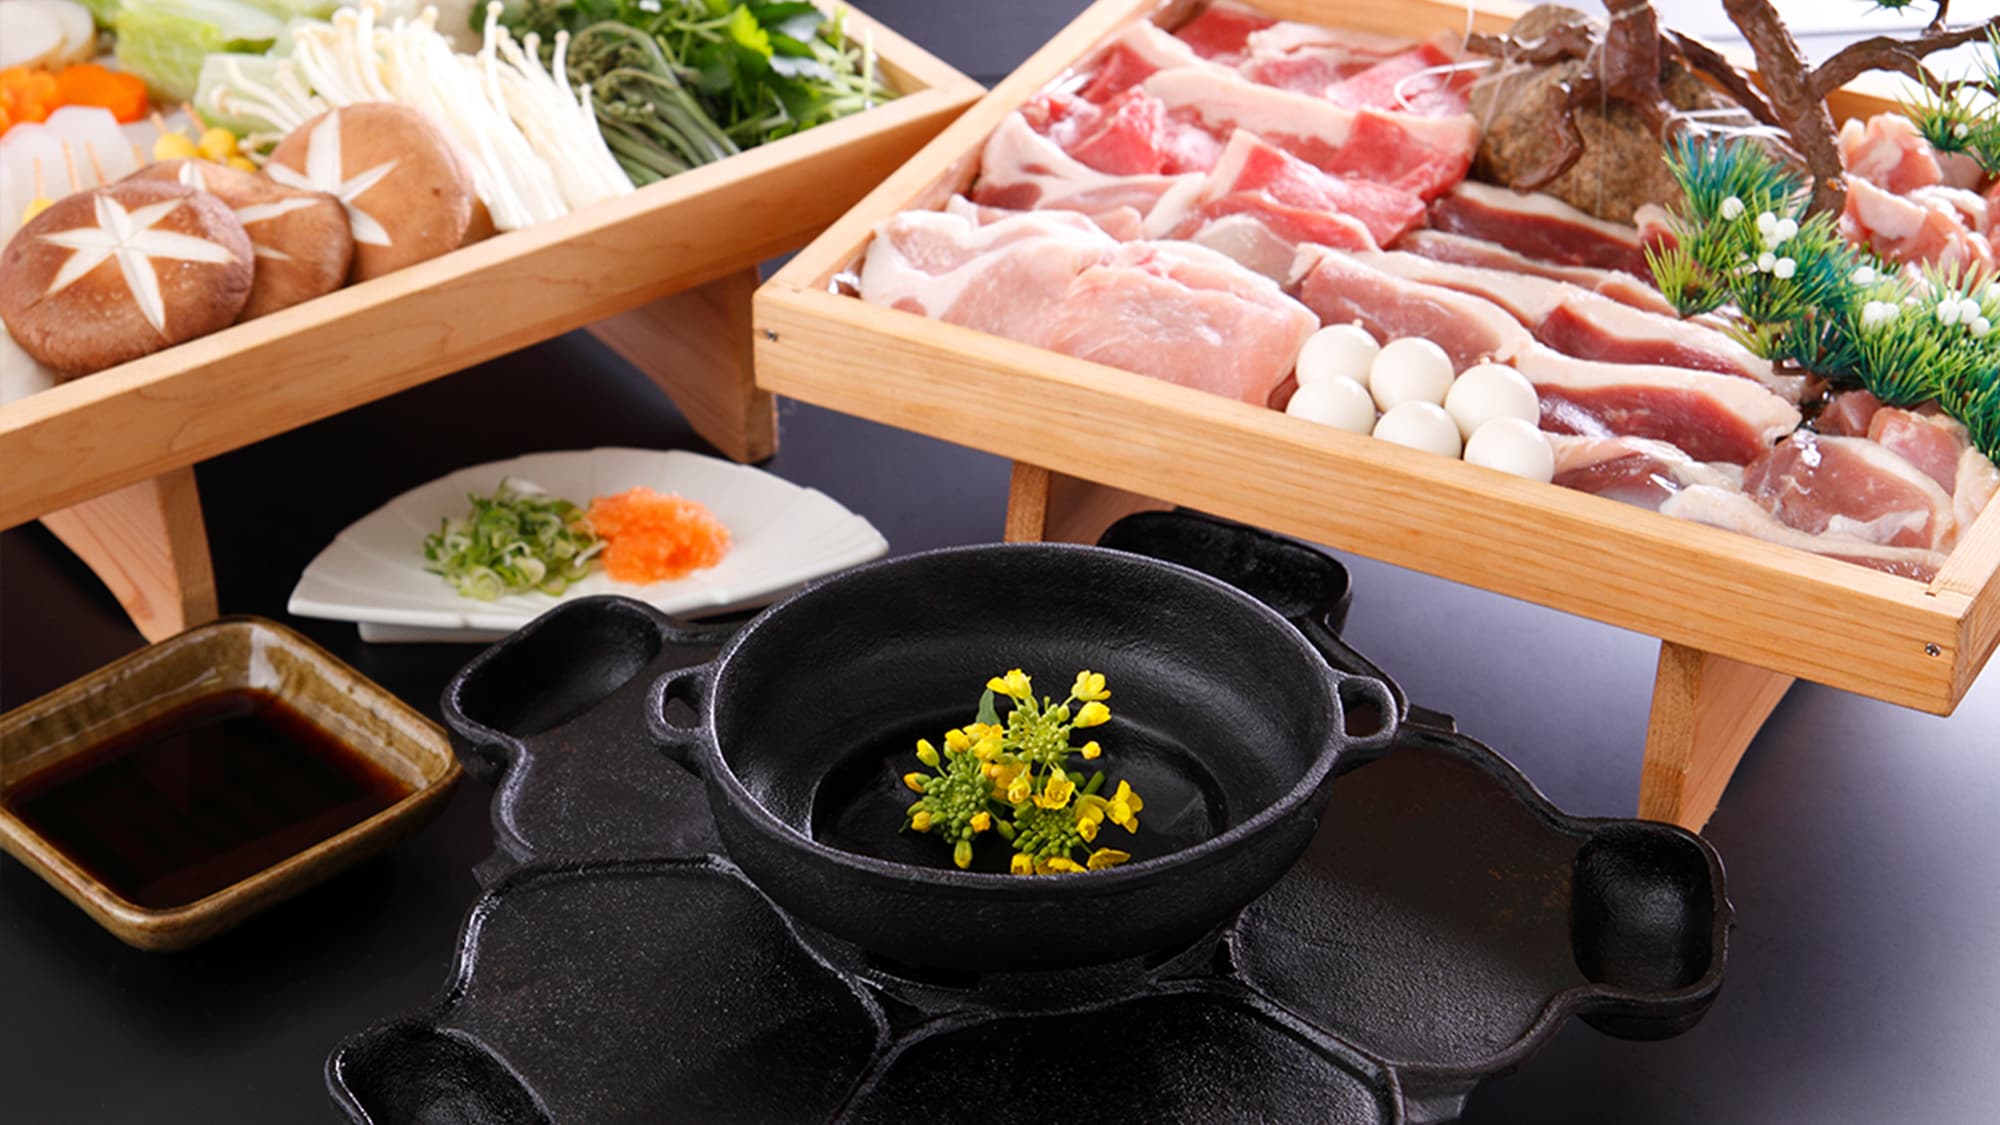 Enjoy the 6 kinds of meat, mountain delicacies, and historical romance of our specialty "Yoshitsune Nabe"